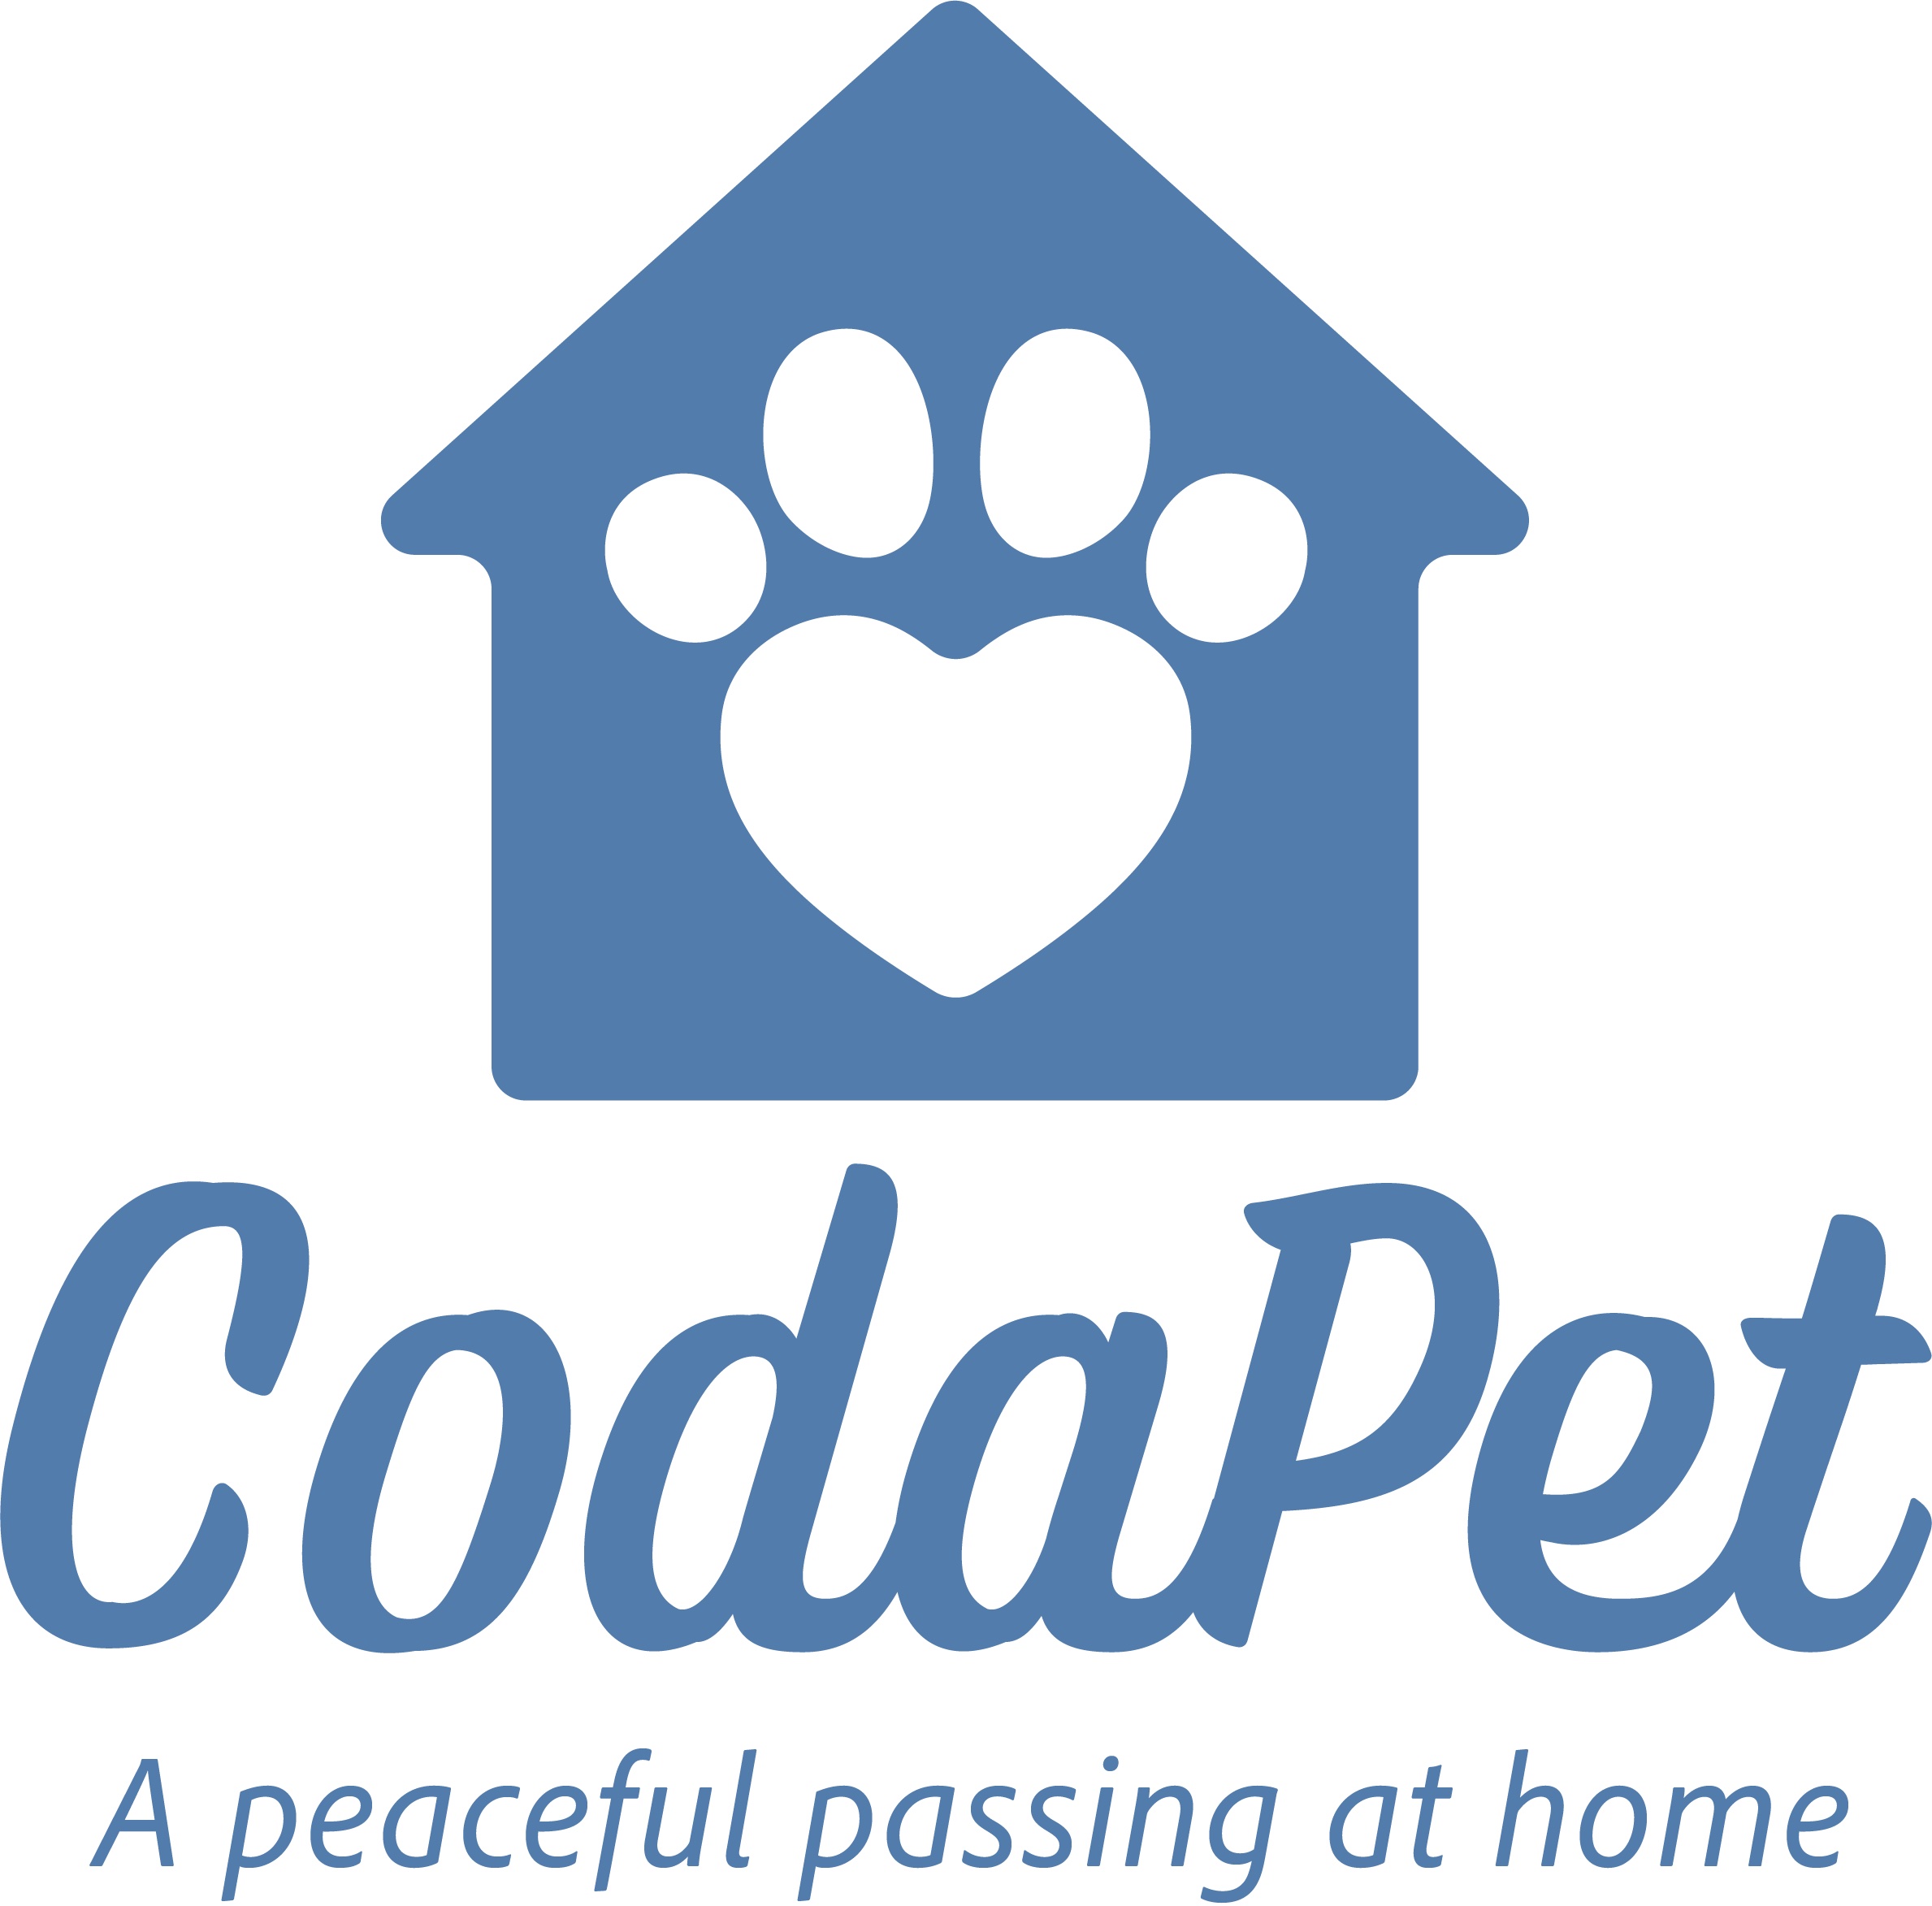 CodaPet-At Home Pet Euthanasia in fort collins